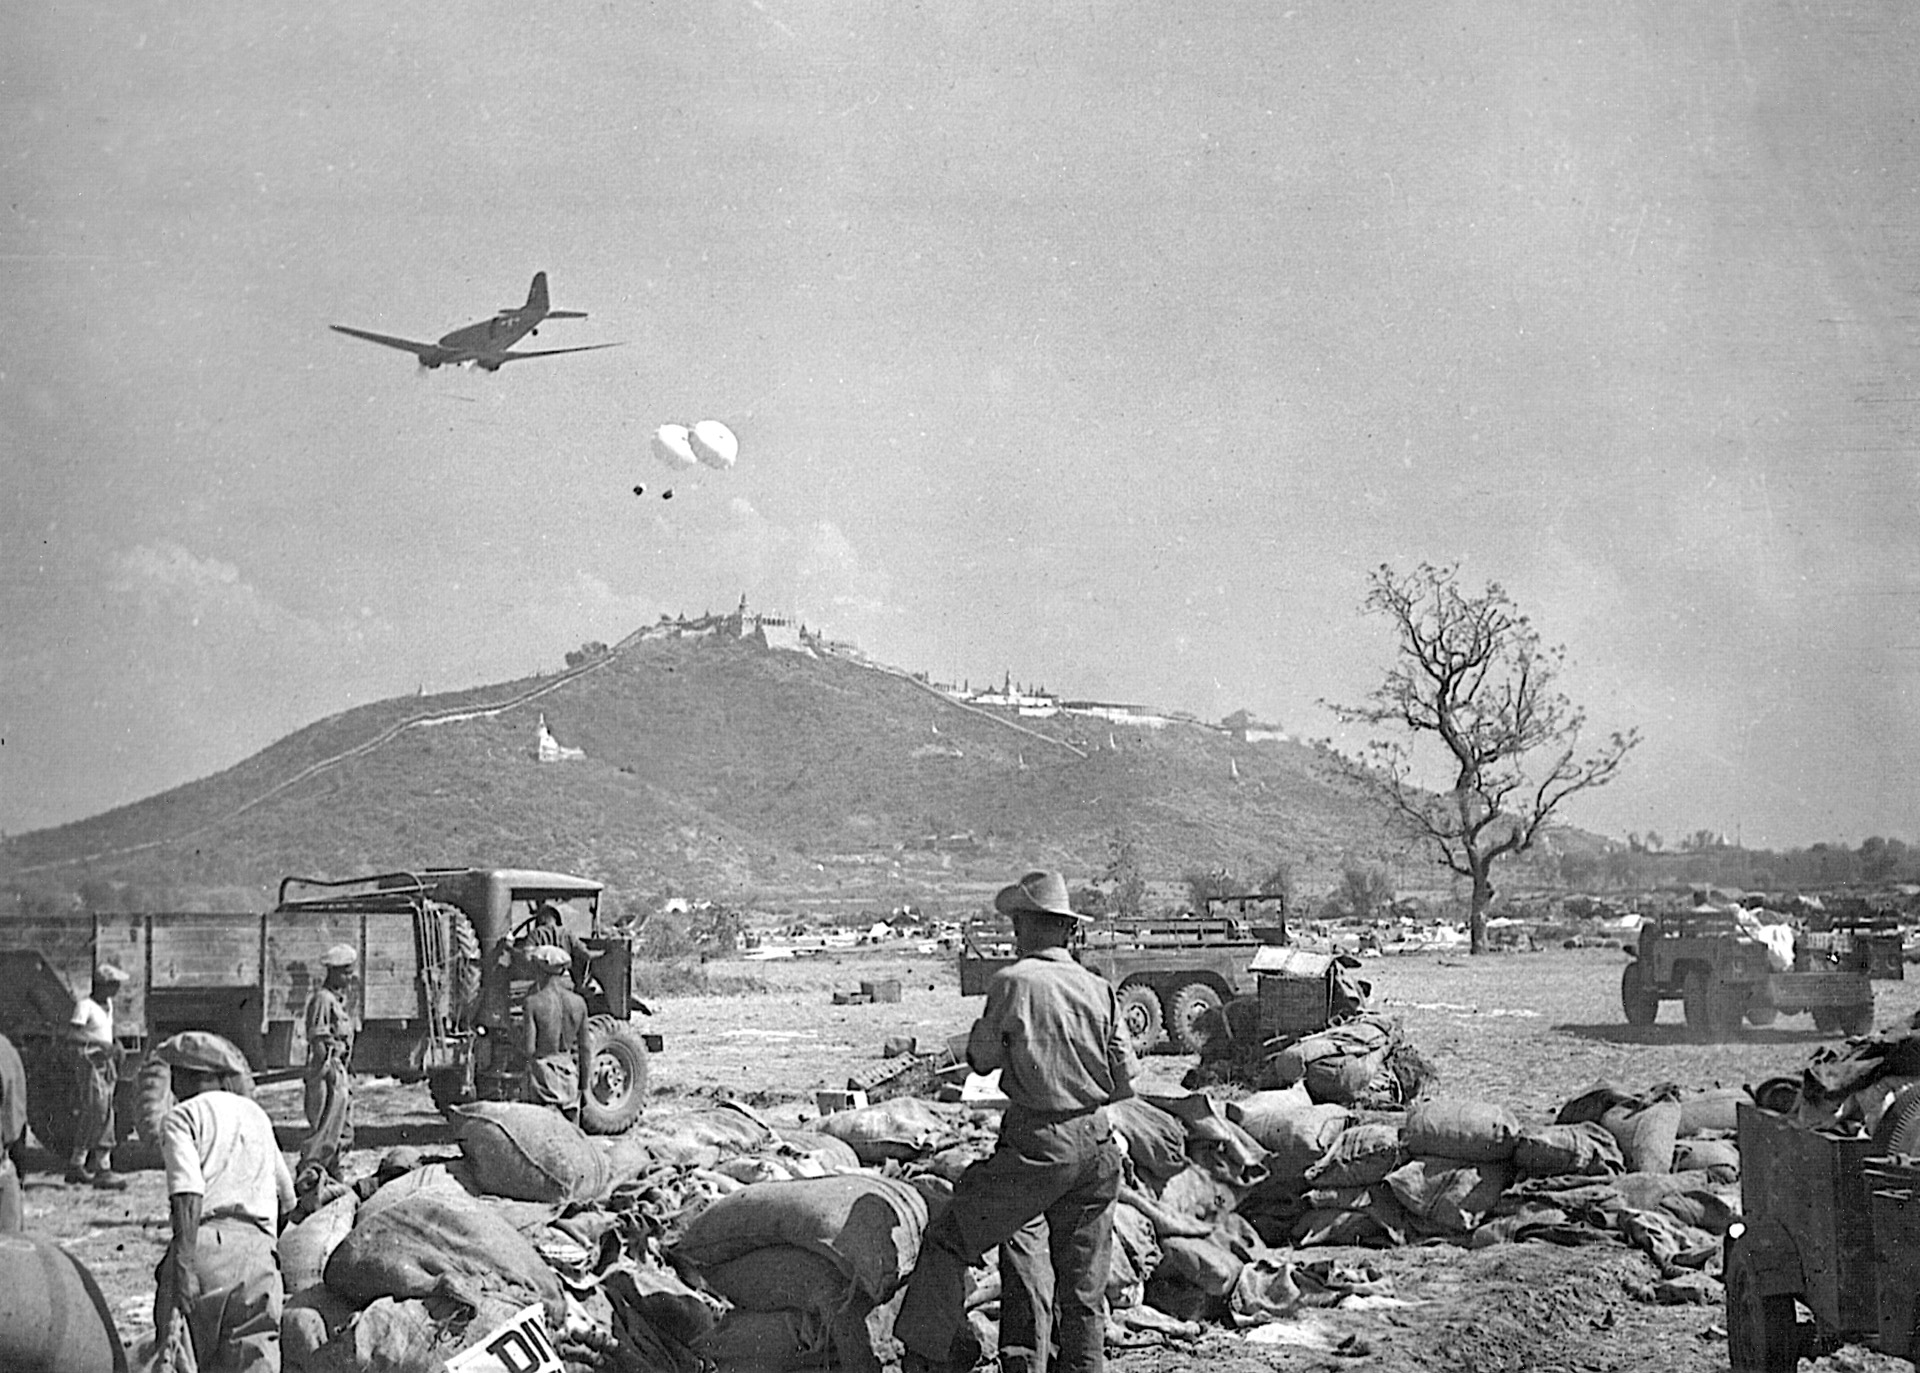 A troop carrier drops supplies to the Chindits in 1945.